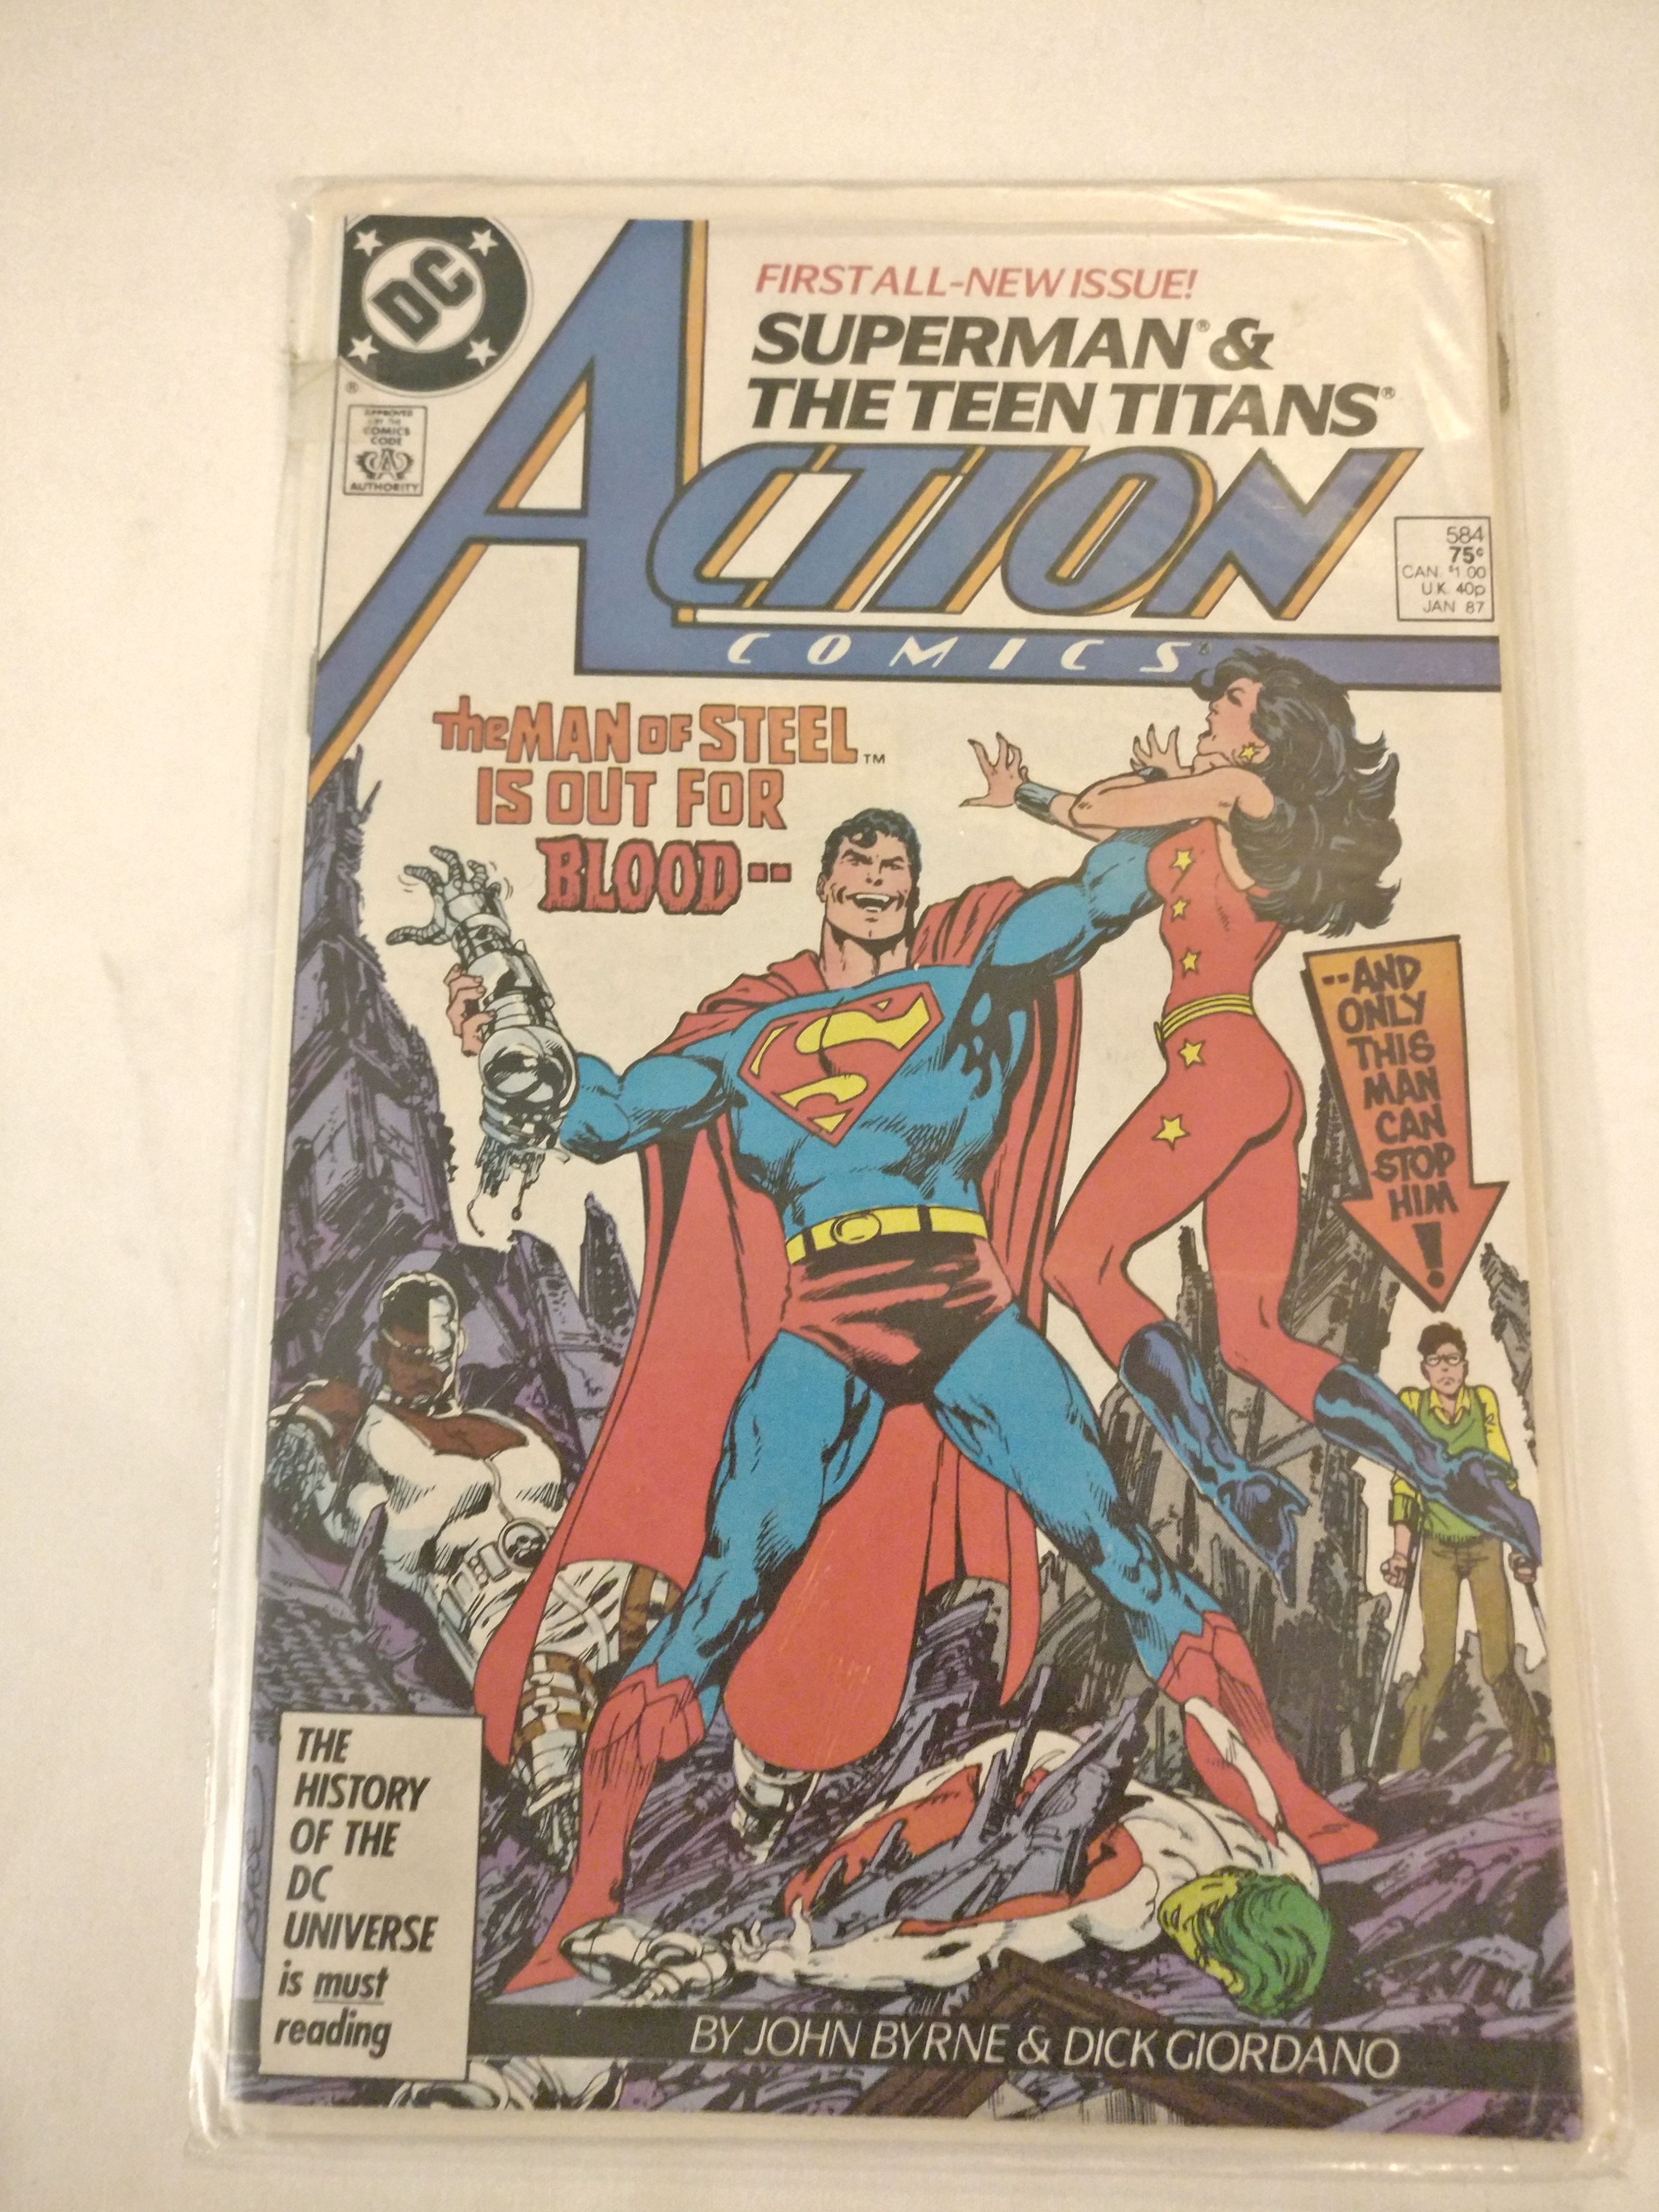 Action comics, Superman first issue, man of steel novel